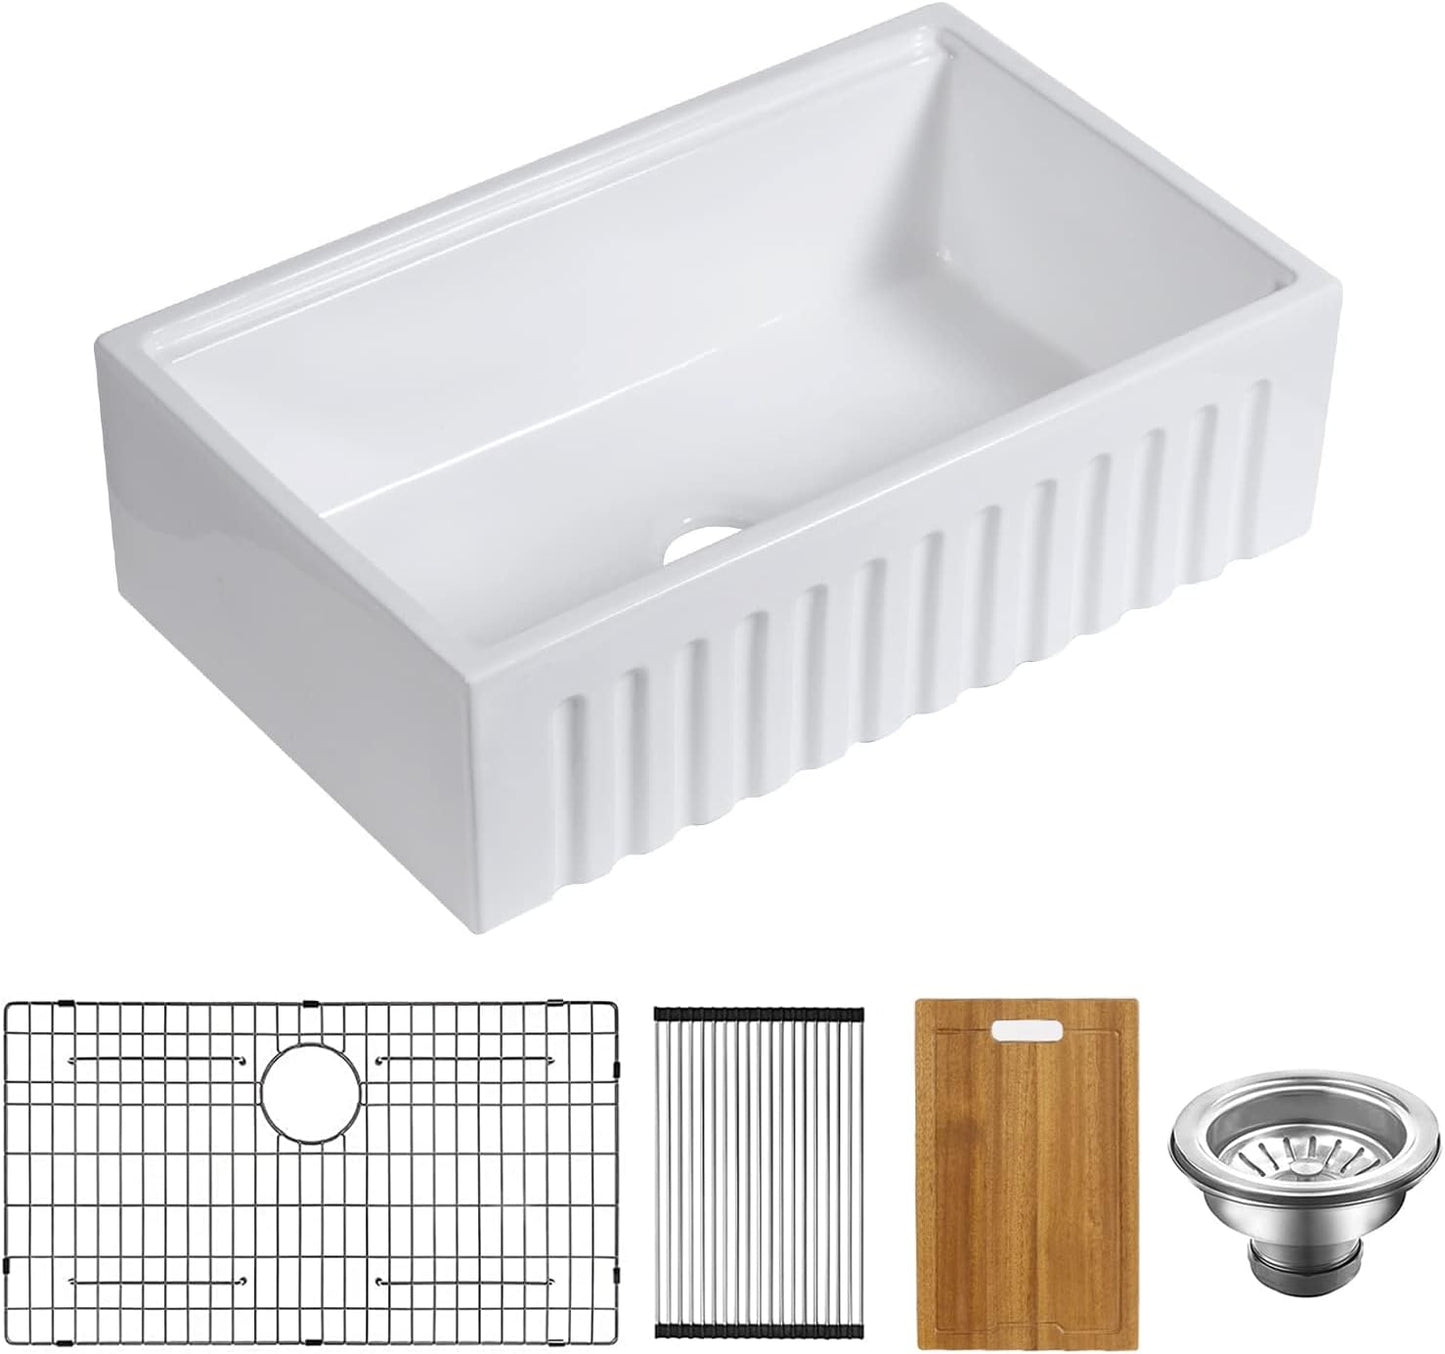 33" x 20" x 10" White Farmhouse Sink, Fireclay Porcelain Single Bowl Apron-Front Workstation Sink, Reversible Ceramic Farm Sink with various accessories